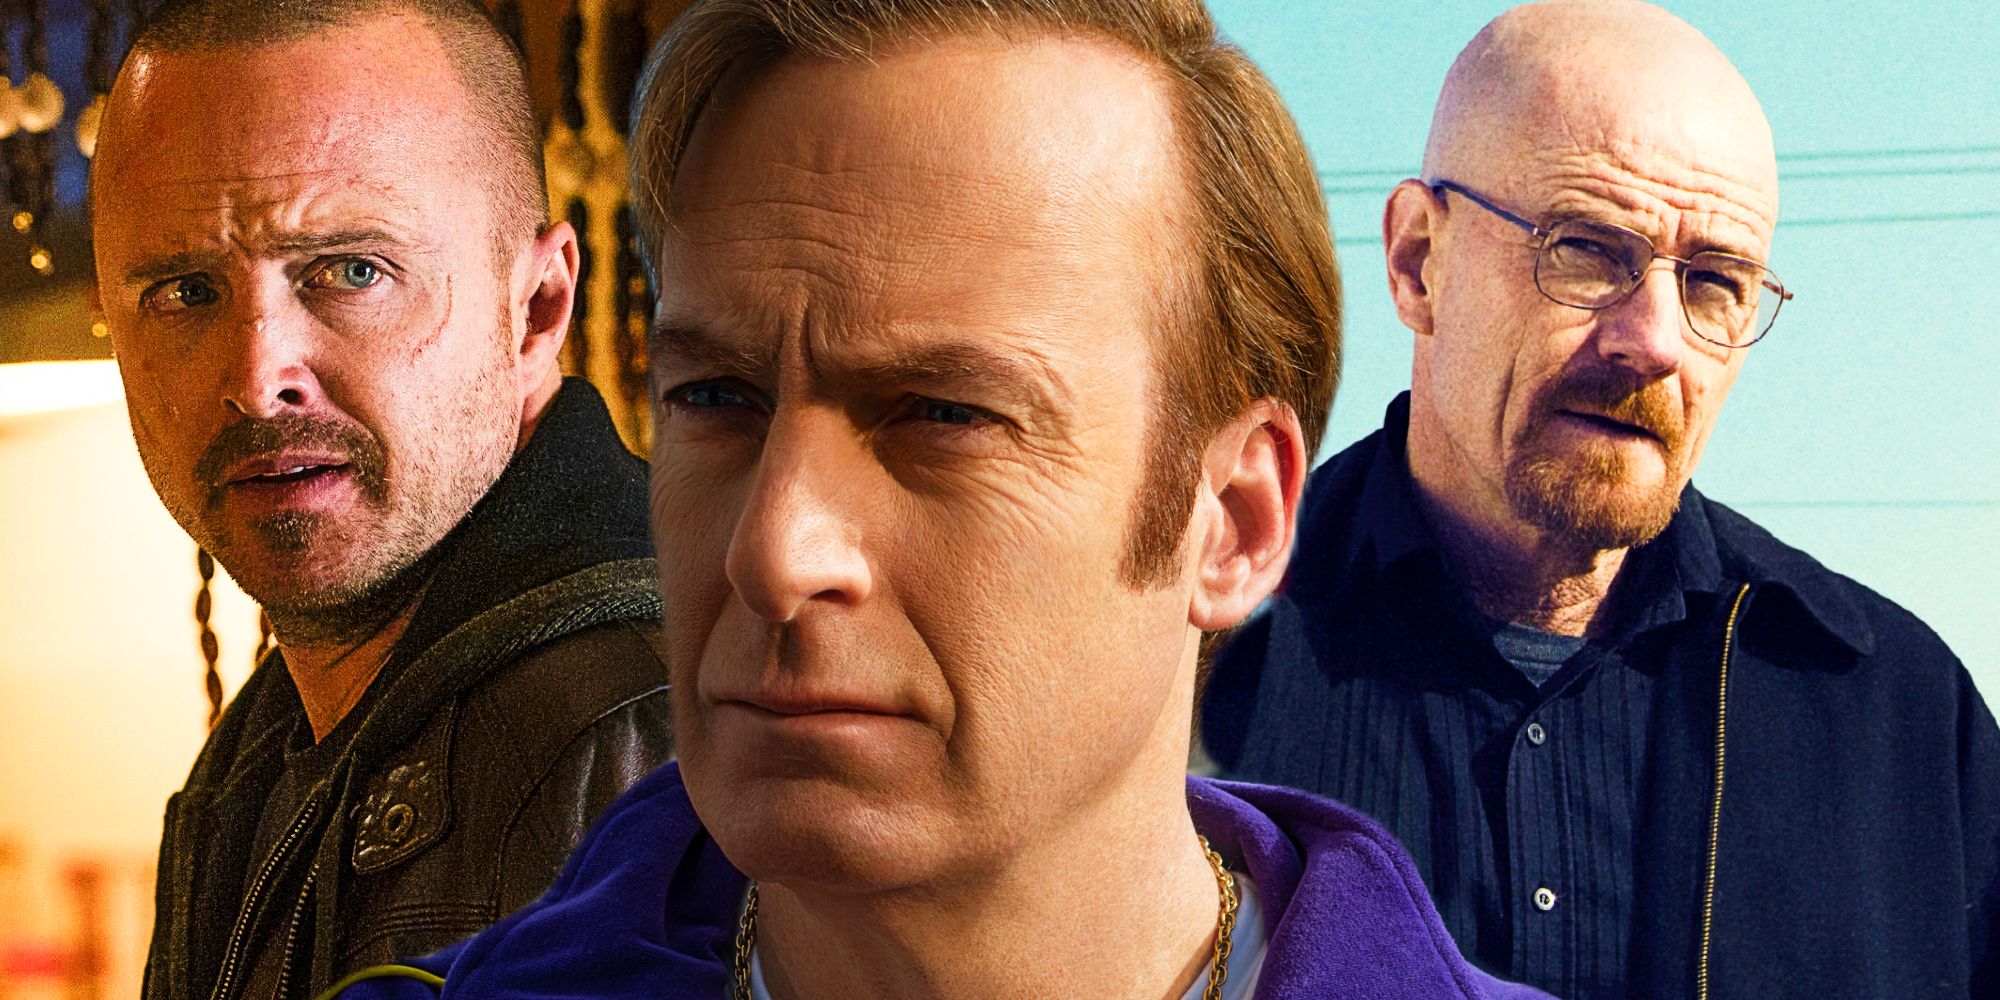 Jesse, Saul, and Walt in the Breaking Bad universe